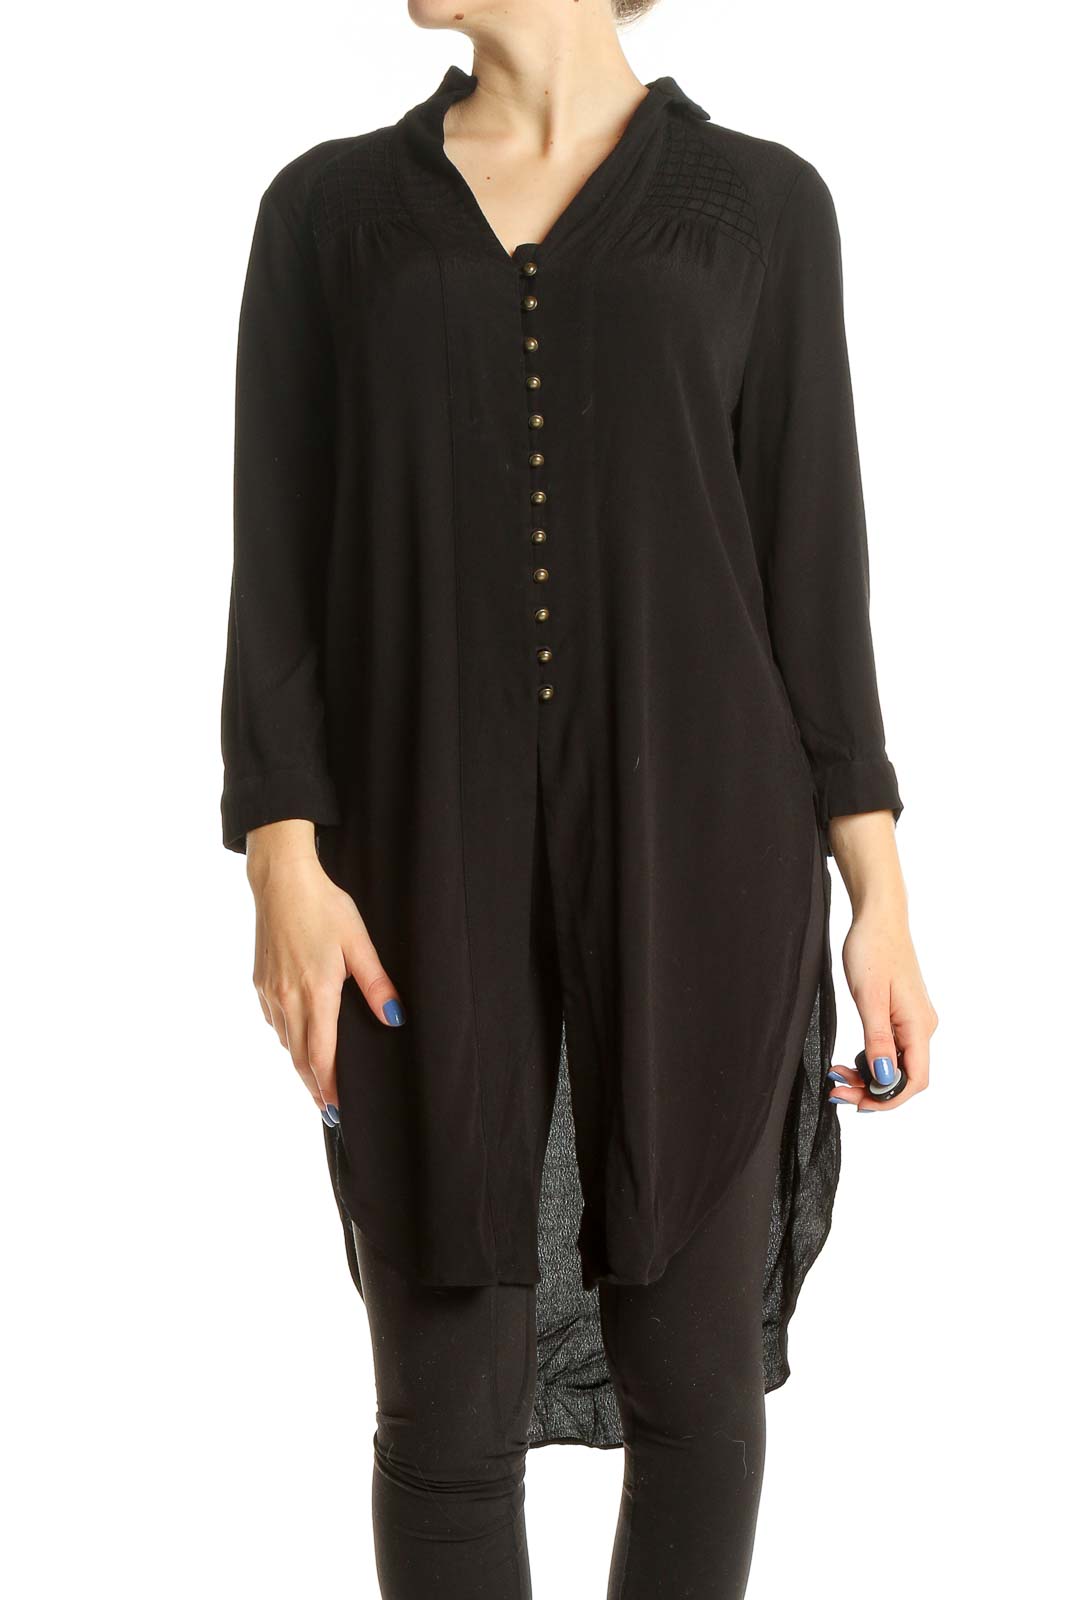 Black Long All Day Wear Top Front